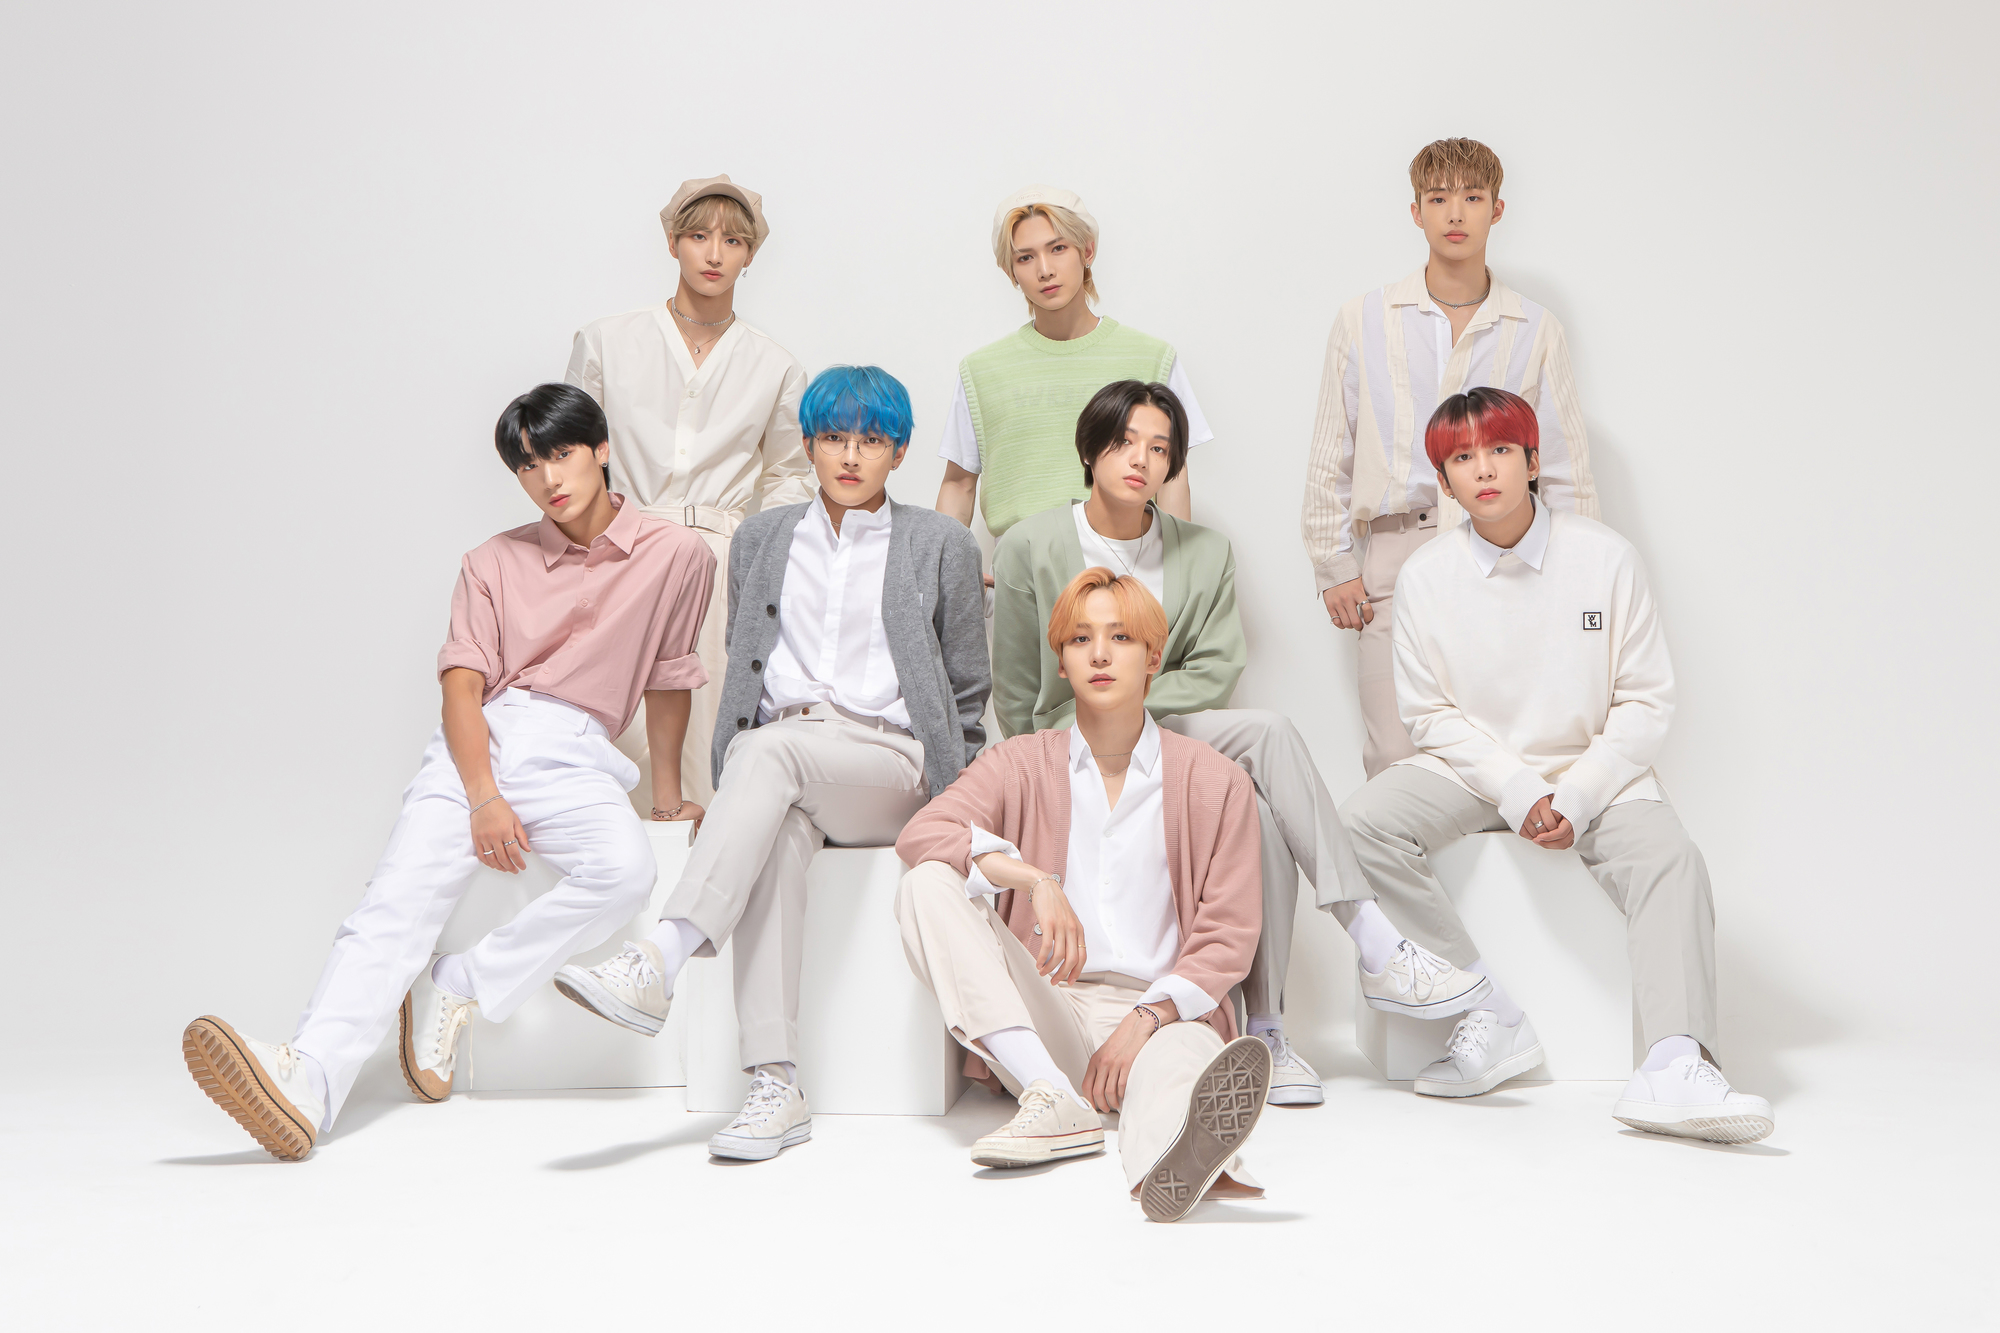 ATEEZカフェ」メインビジュアル公開！ | ATEEZ JAPAN OFFICIAL SITE